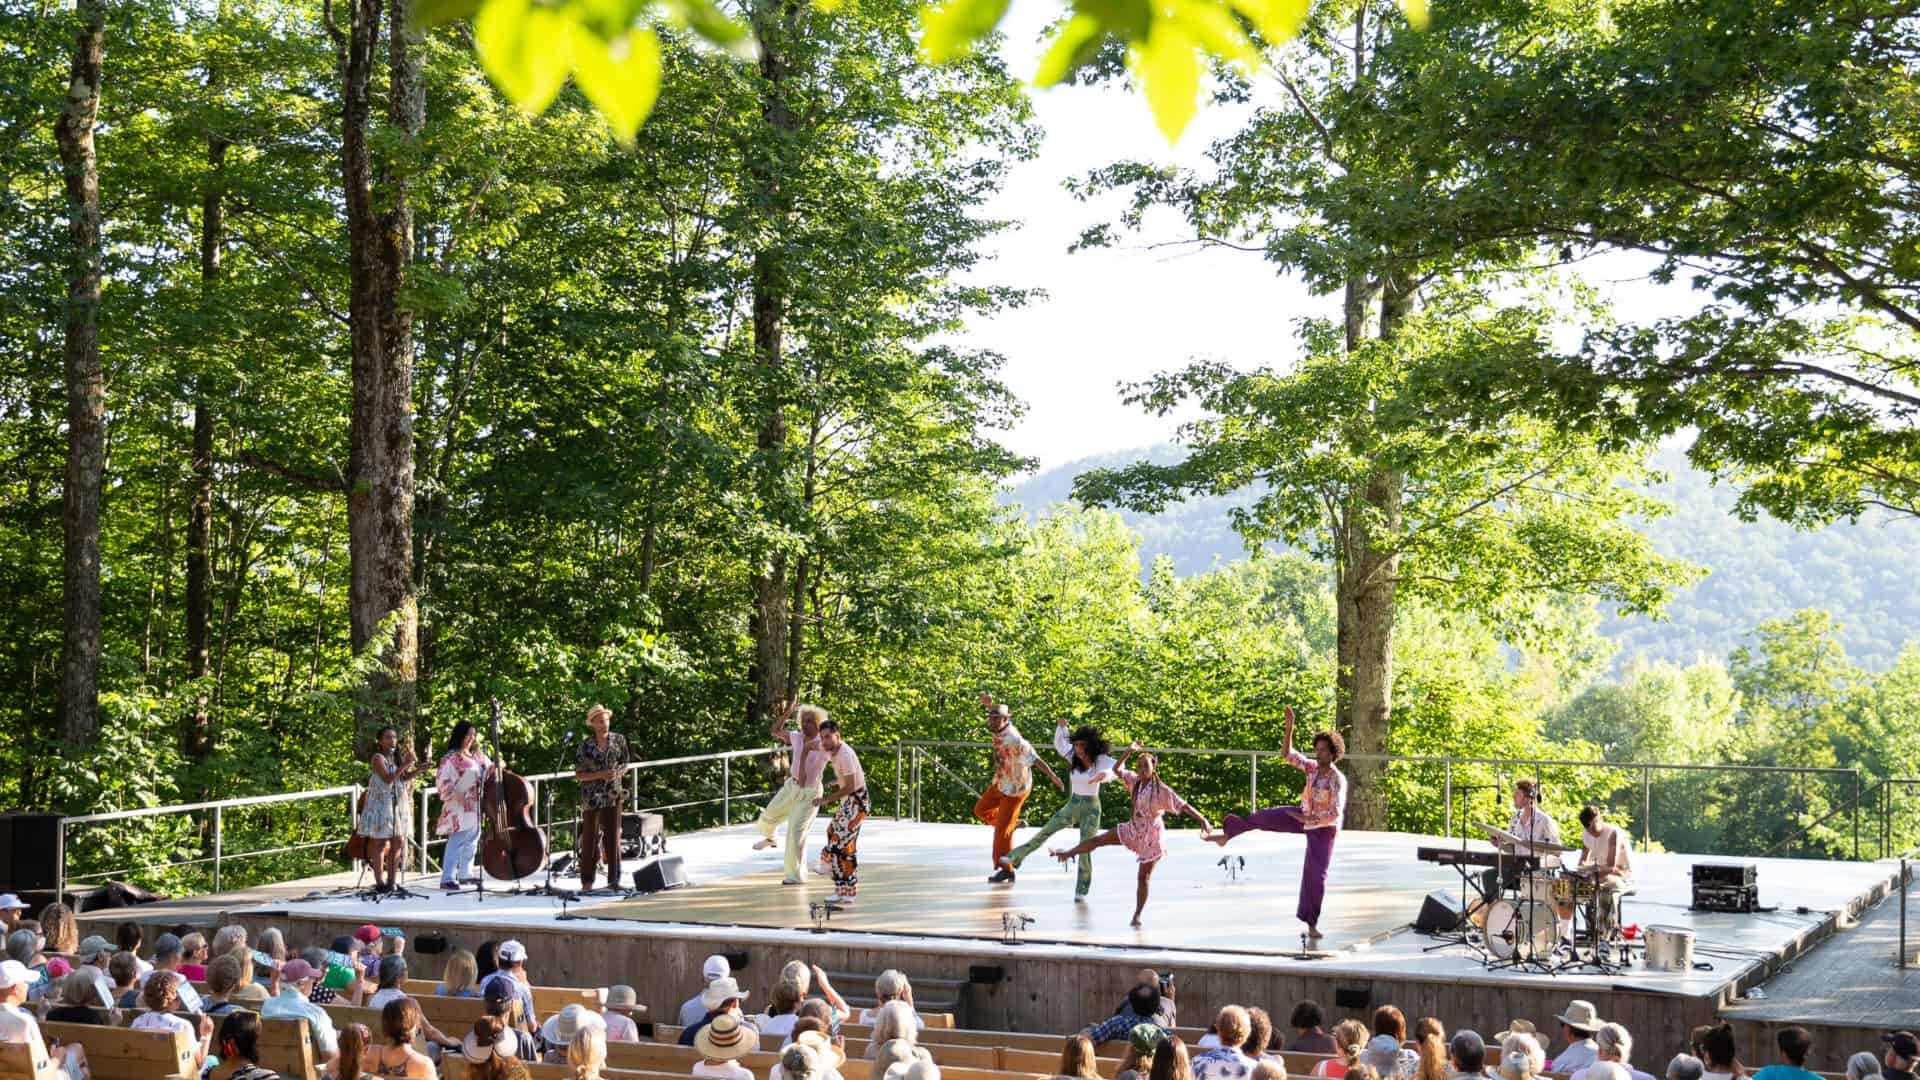 Performers with Music from the Sole perform tap inflected with Brazilian rhythms. Press photo courtesy of Jacob's Pillow Dance Festival.